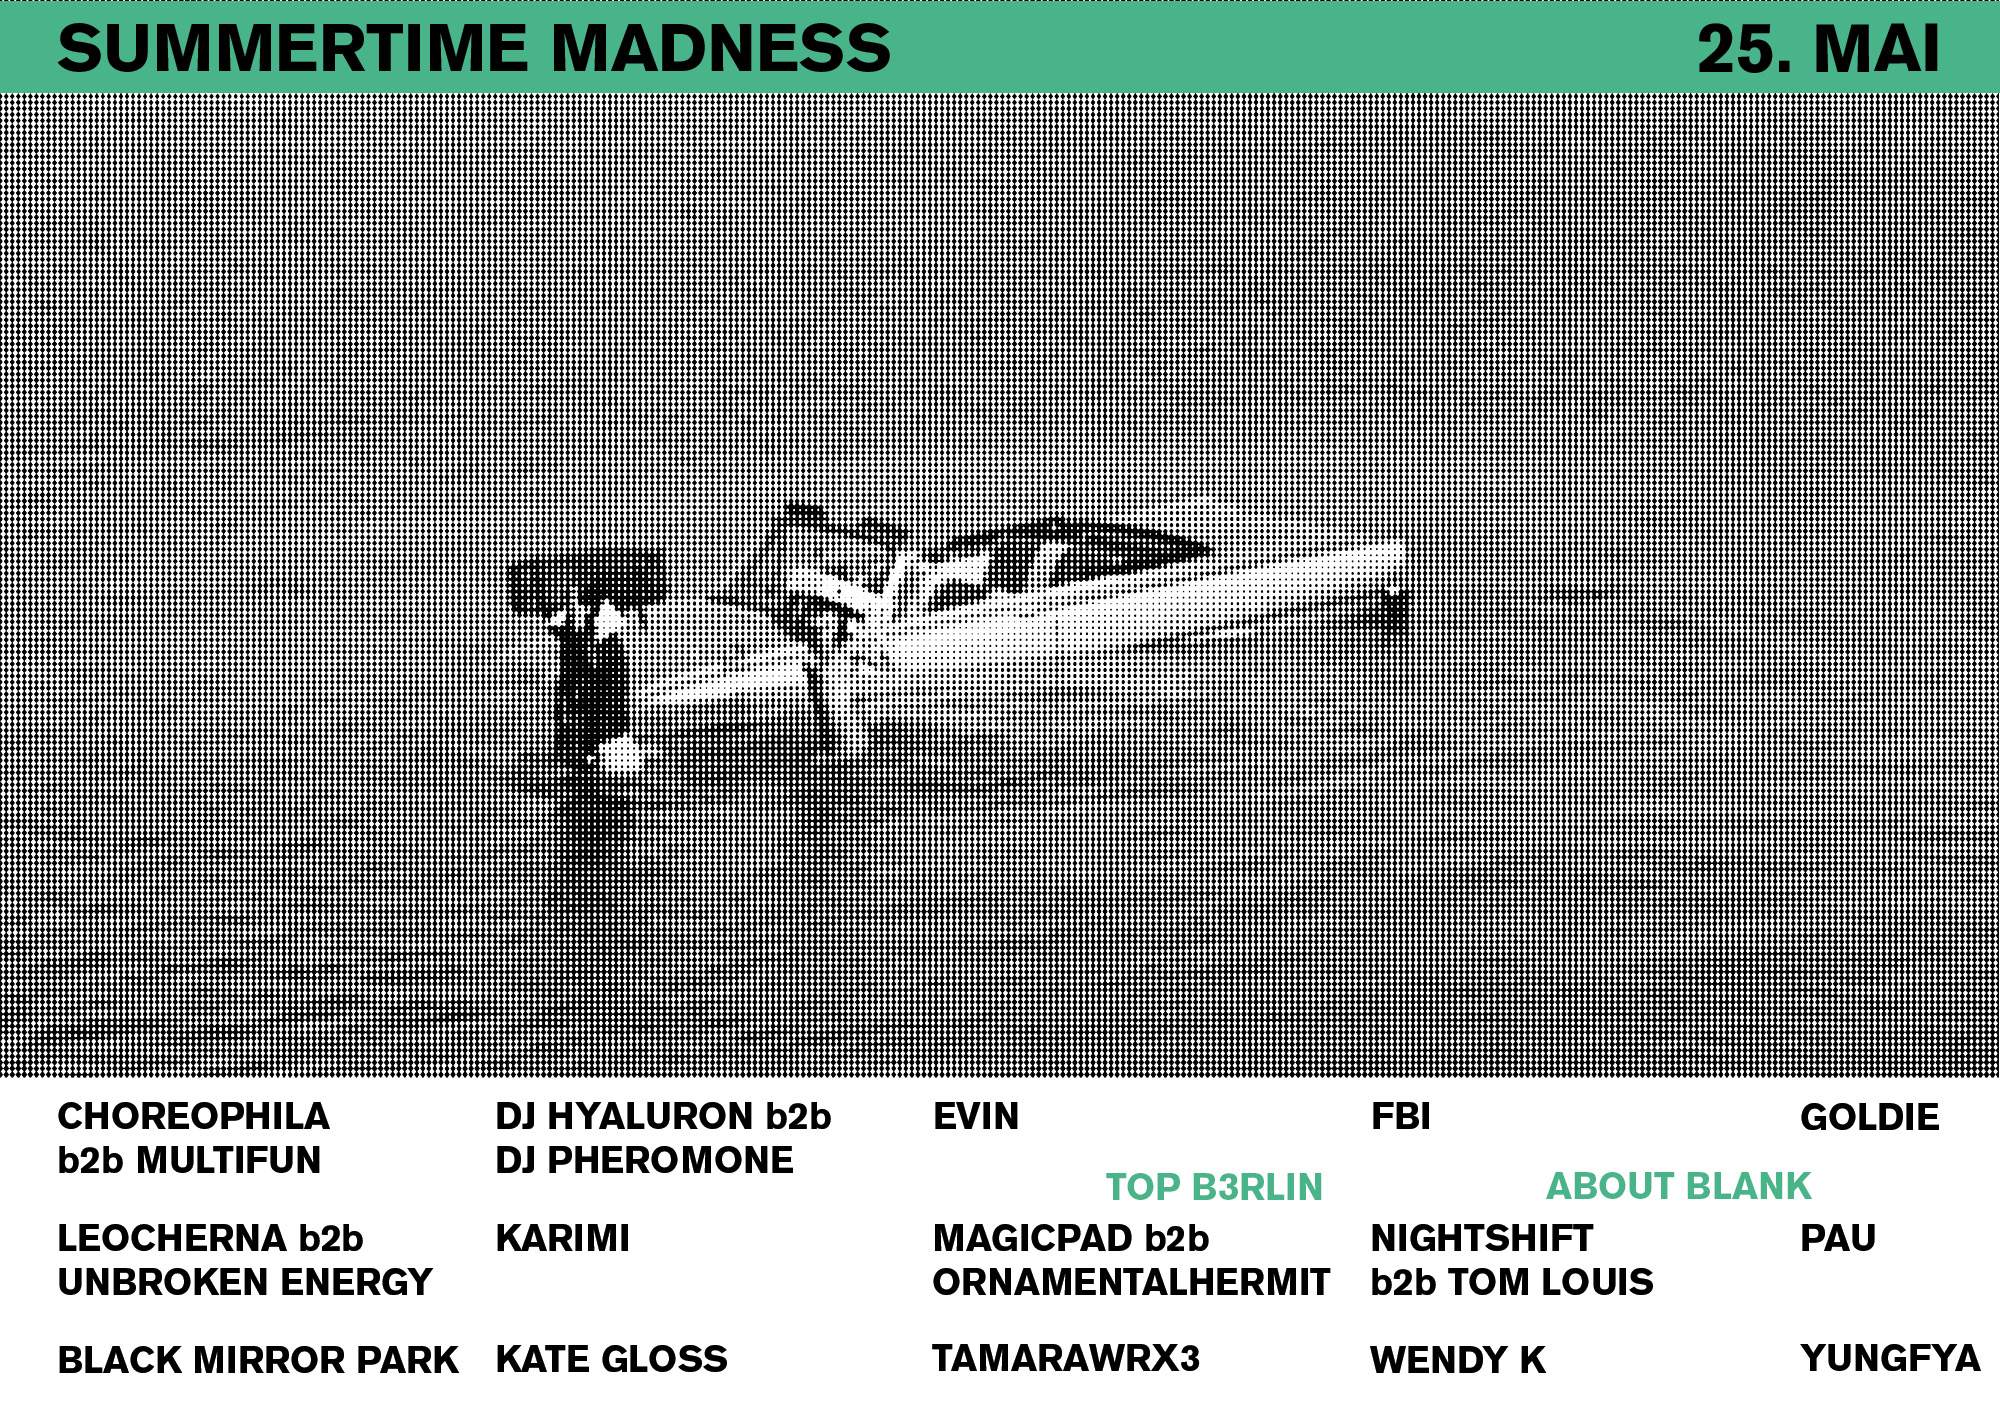 Summertime Madness with yungfya, evin, PAU & many more - Página trasera